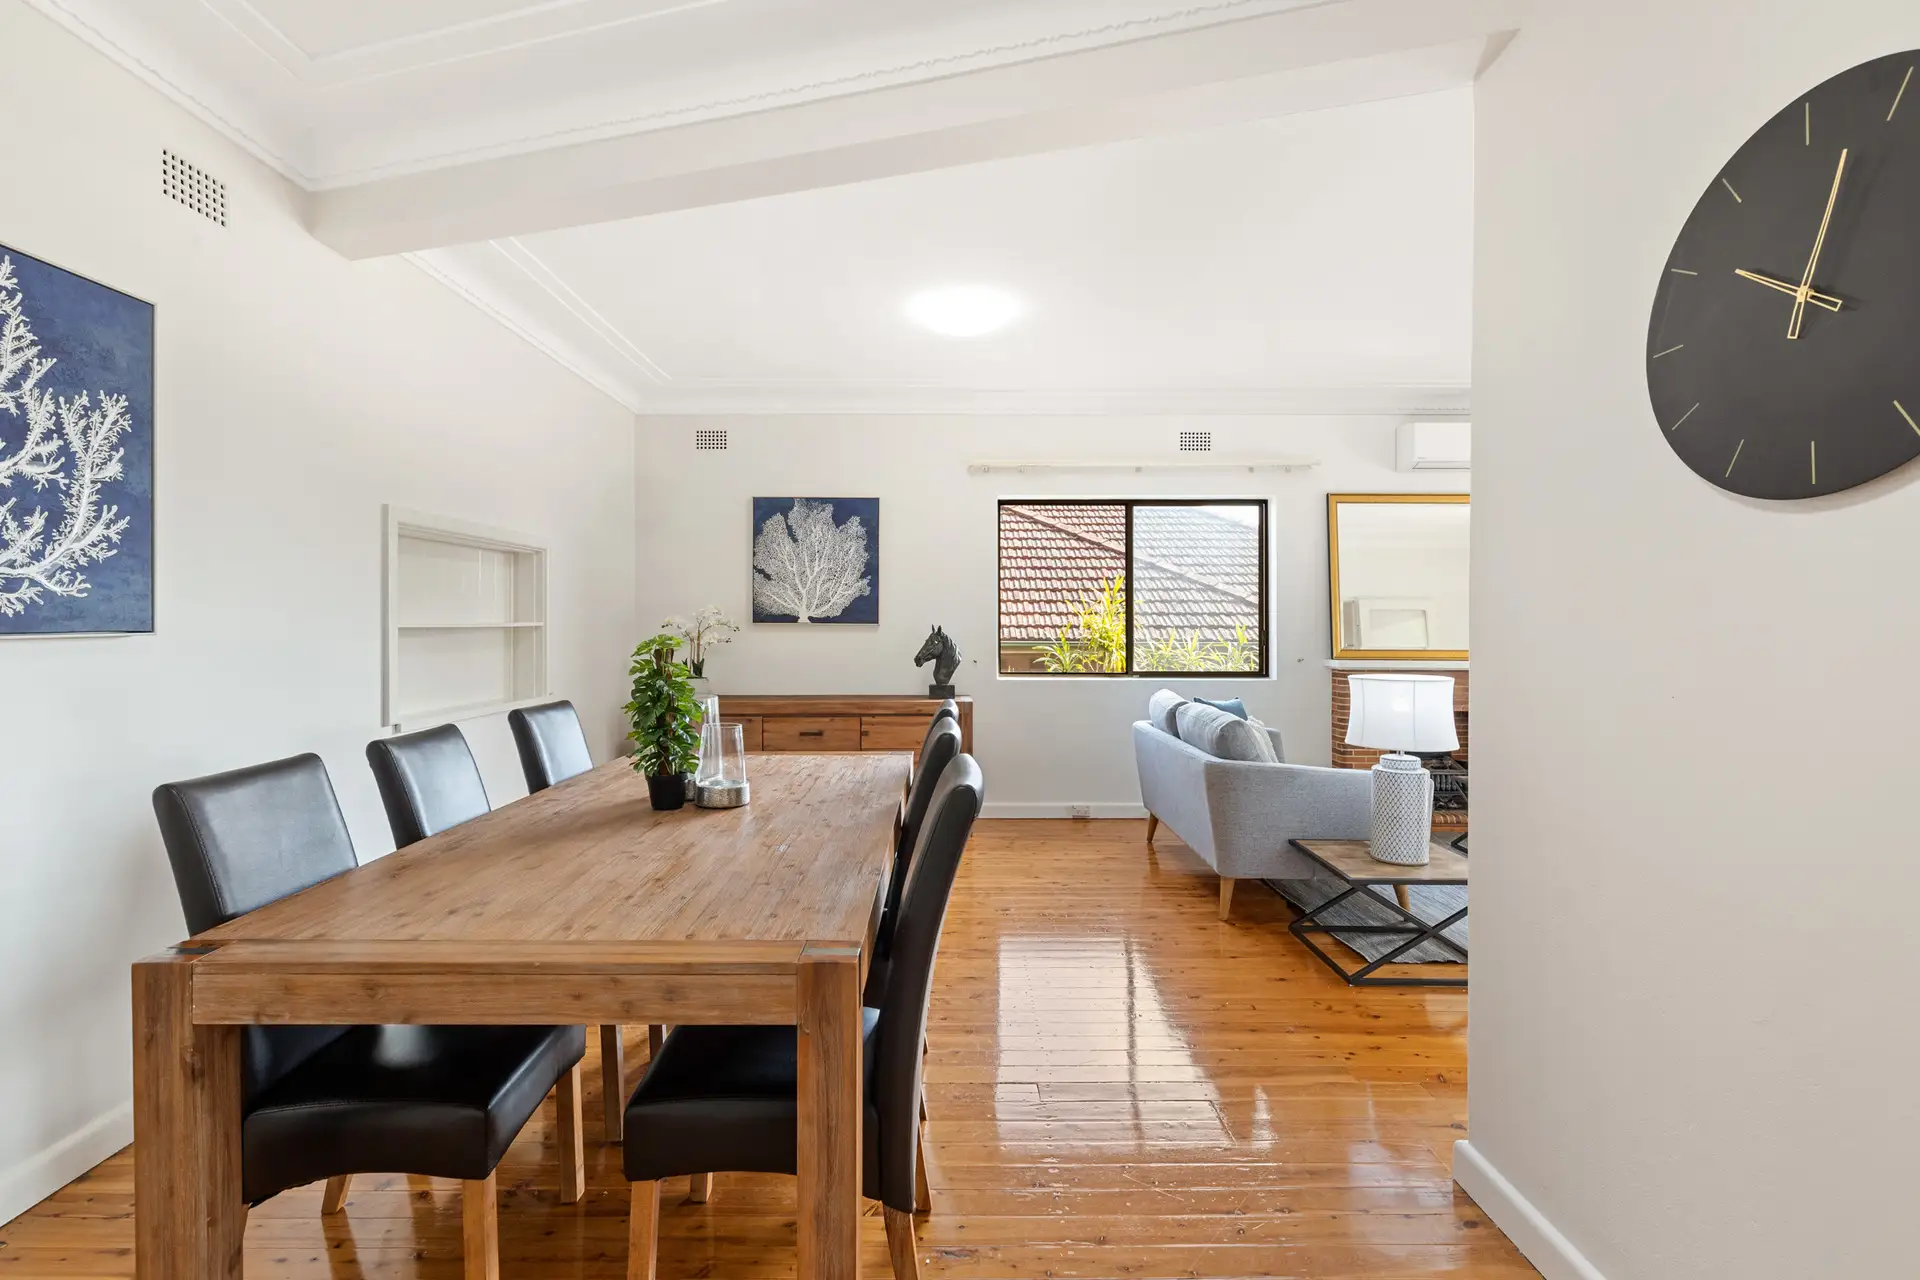 5 Bellevue Street, Chatswood Sold by Shead Property - image 1